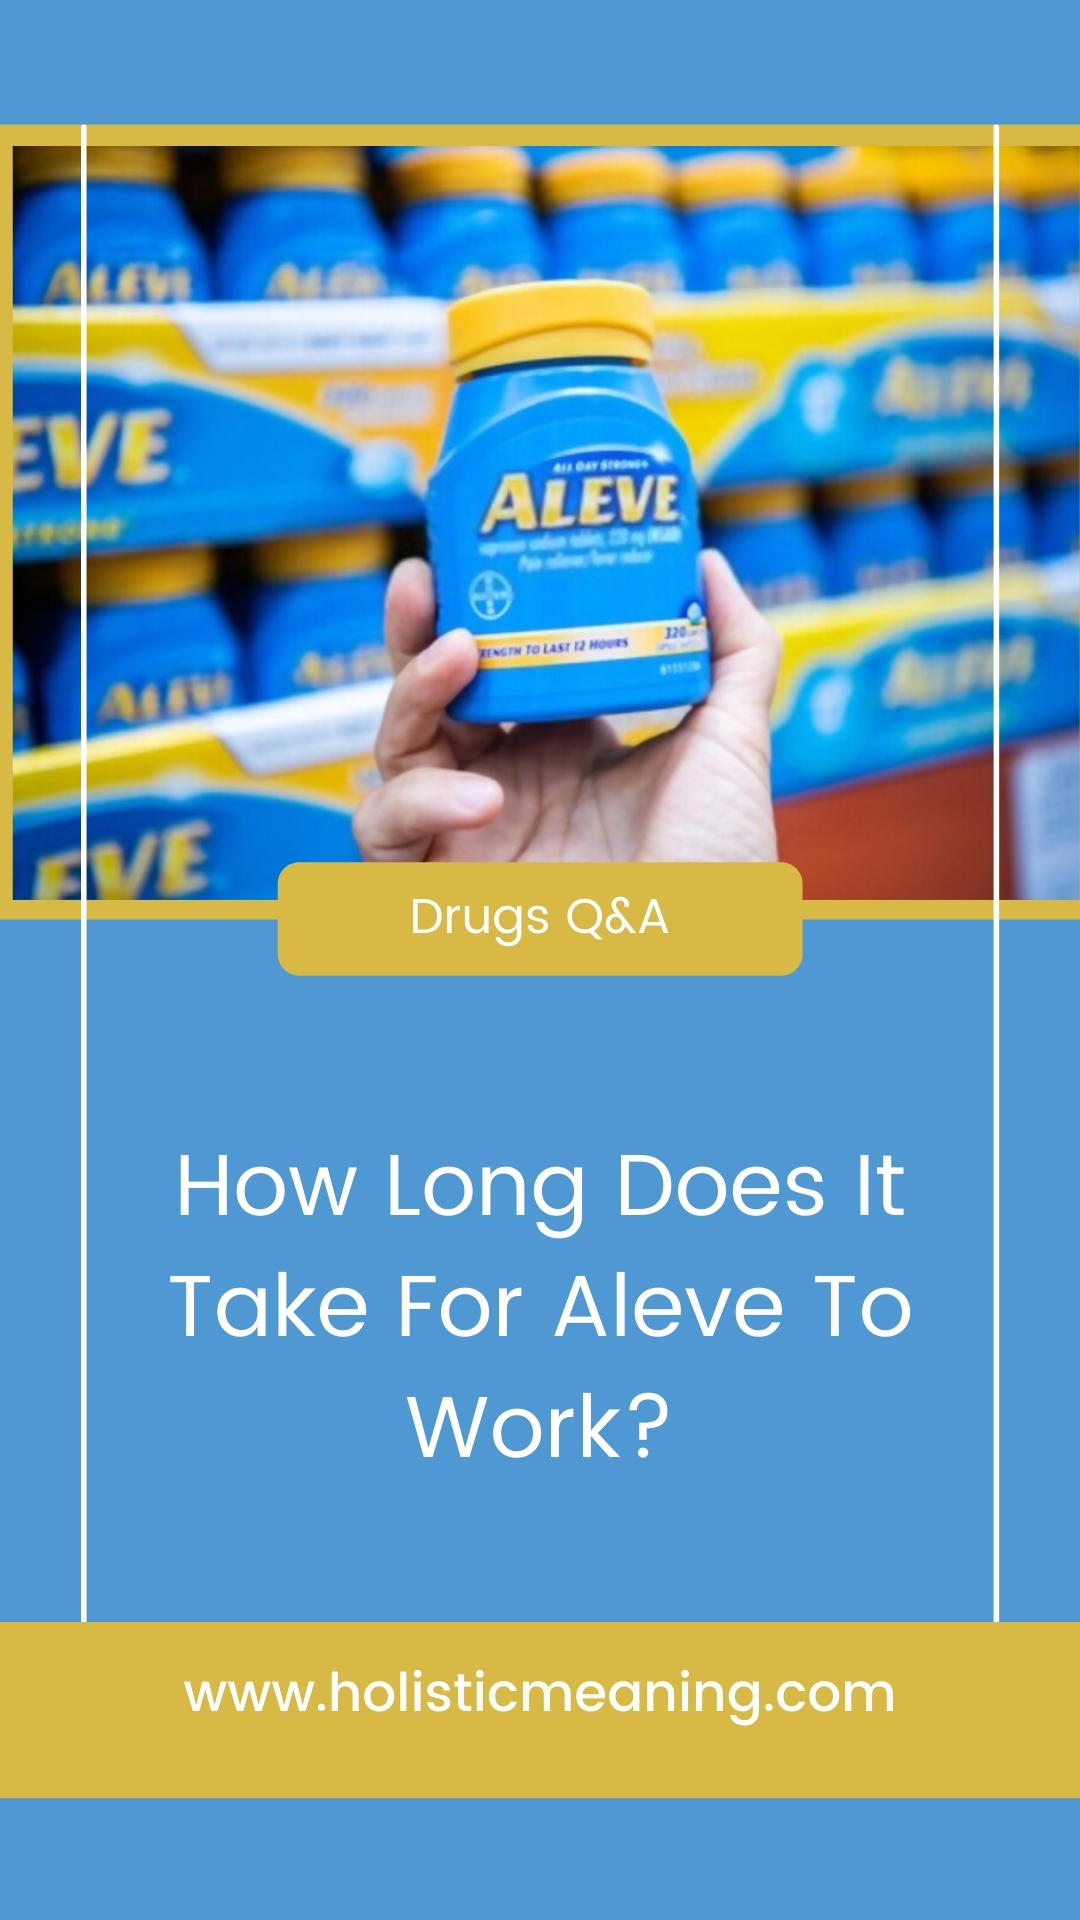 How Long Does It Take For Aleve To Work?